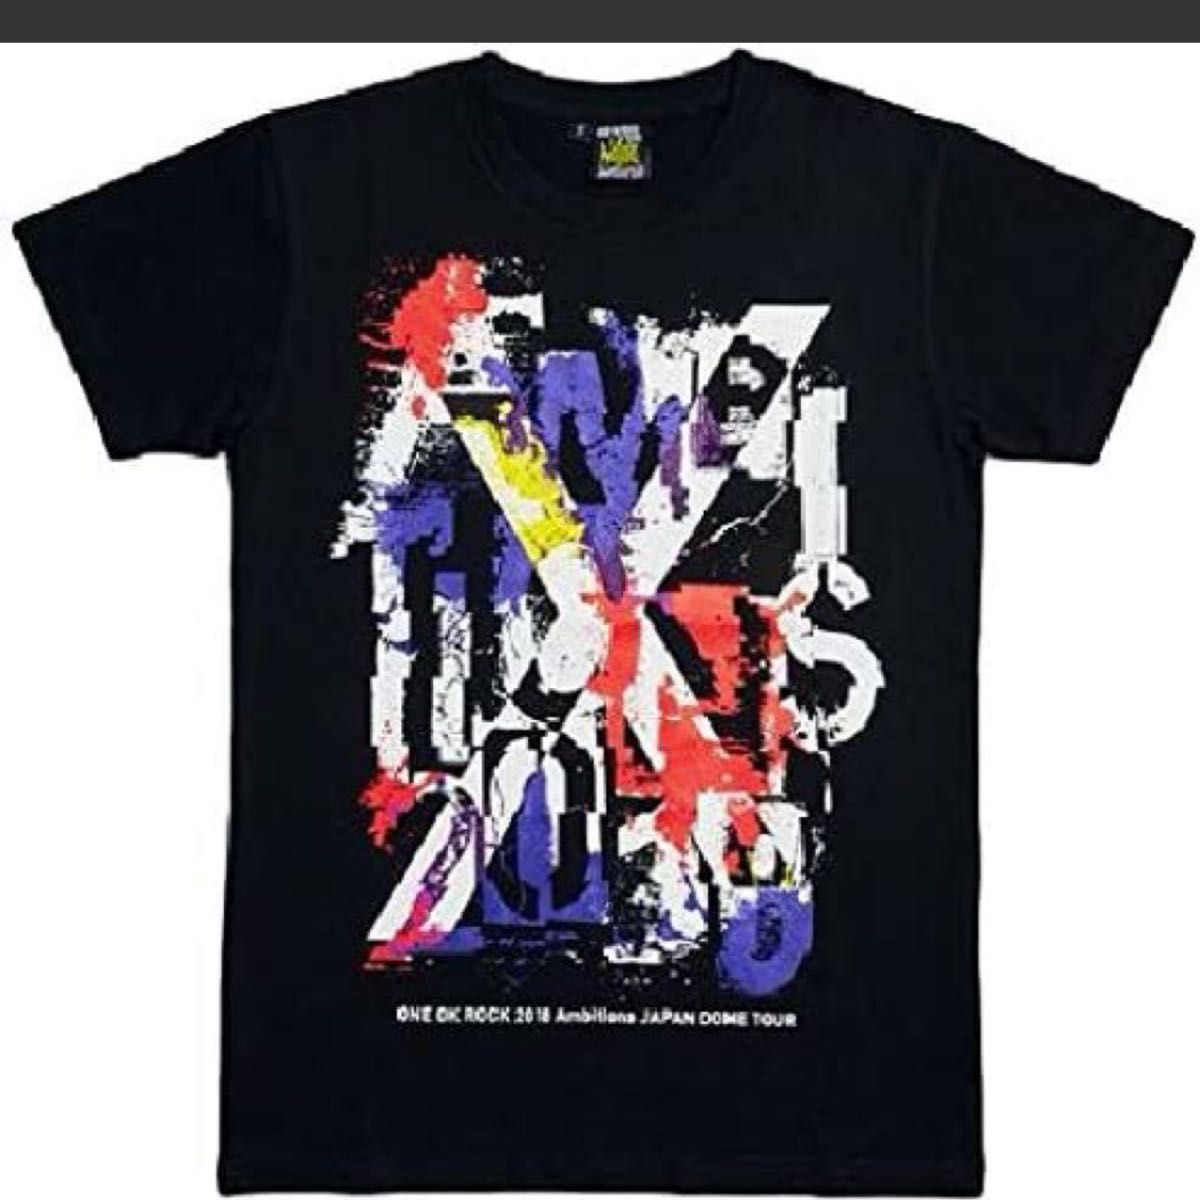 ONE OK ROCK 2018 AMBITIONS JAPAN DOME TOUR 公式グッズ Tシャツ BLACK Sサイズ